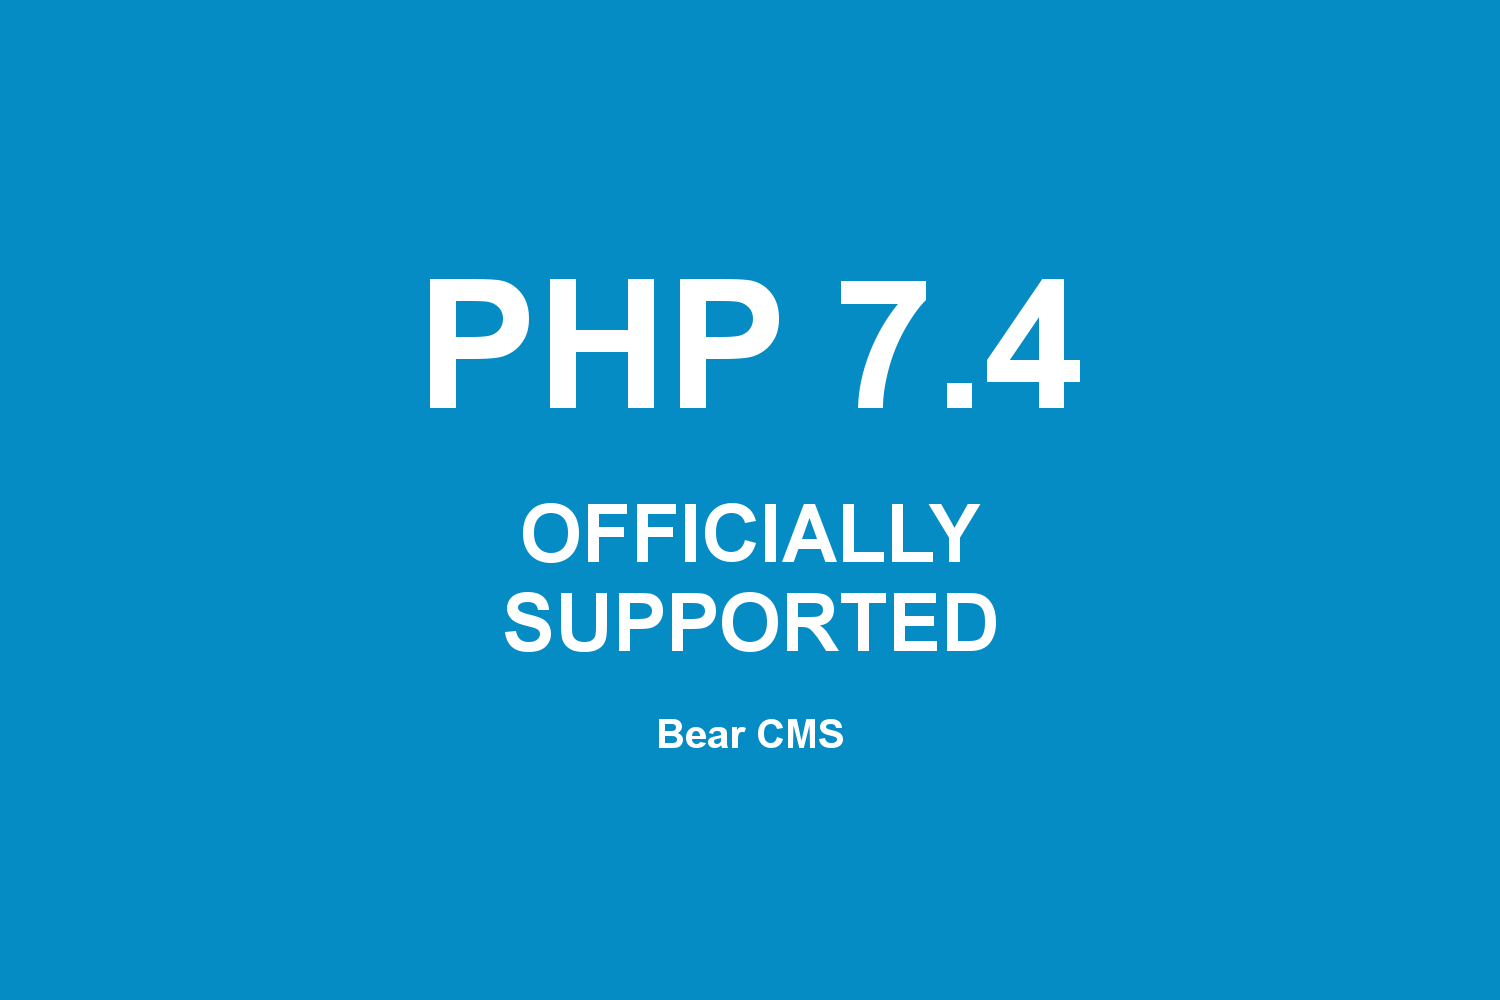 PHP 7.4 is now supported